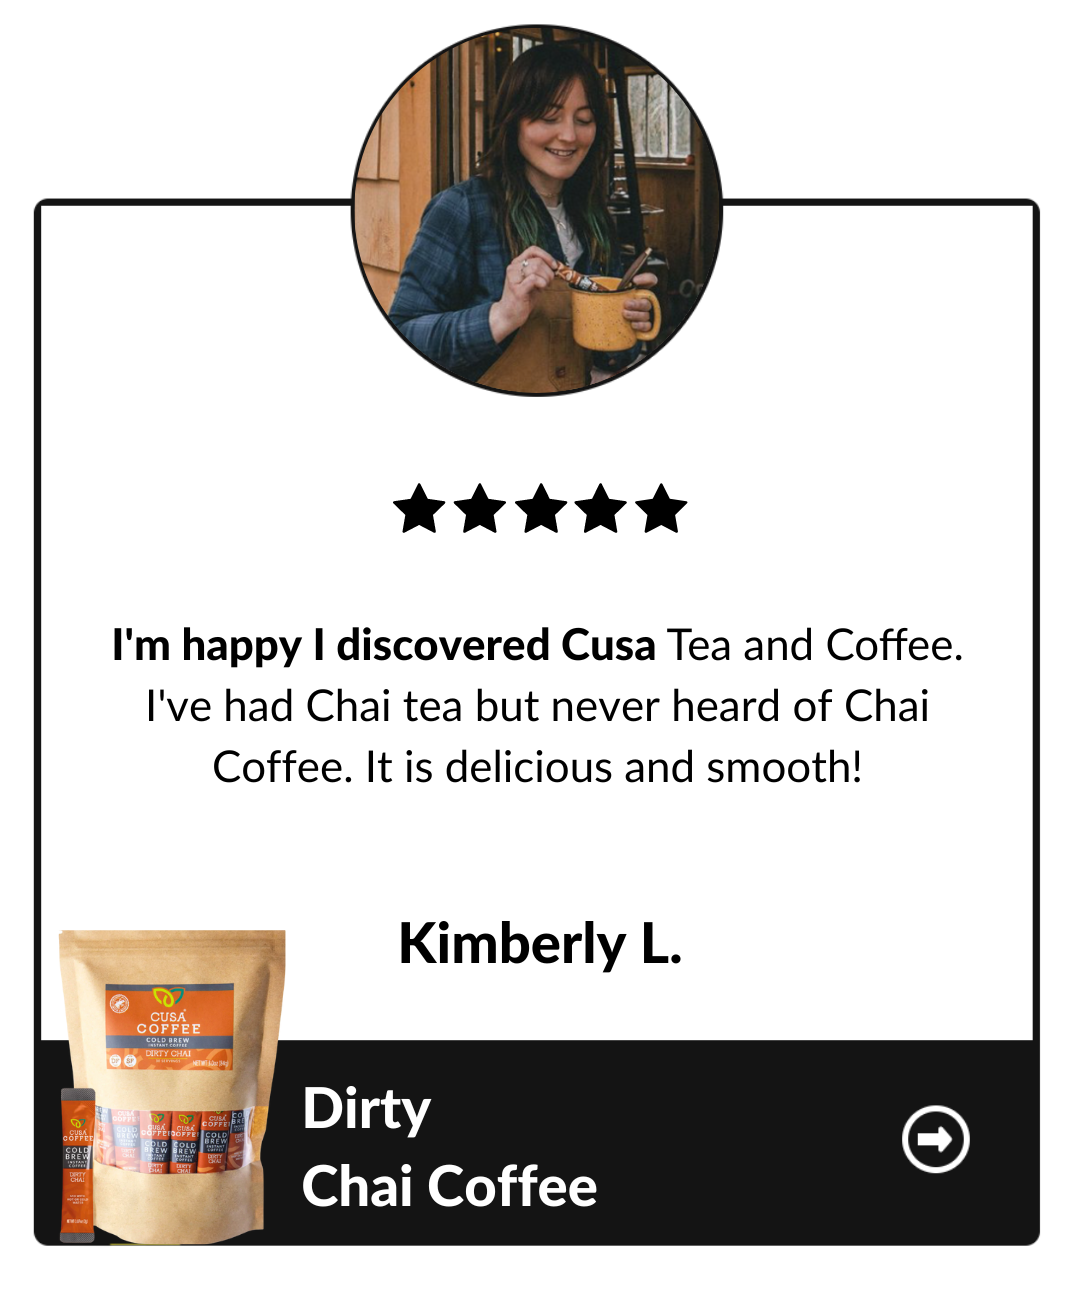 I'm happy I discovered Cusa Tea and Coffee. I've had chai tea but never heard of chai coffee. it is delicious and smooth! Kimberly L, Dirty Chai Coffee testimonial